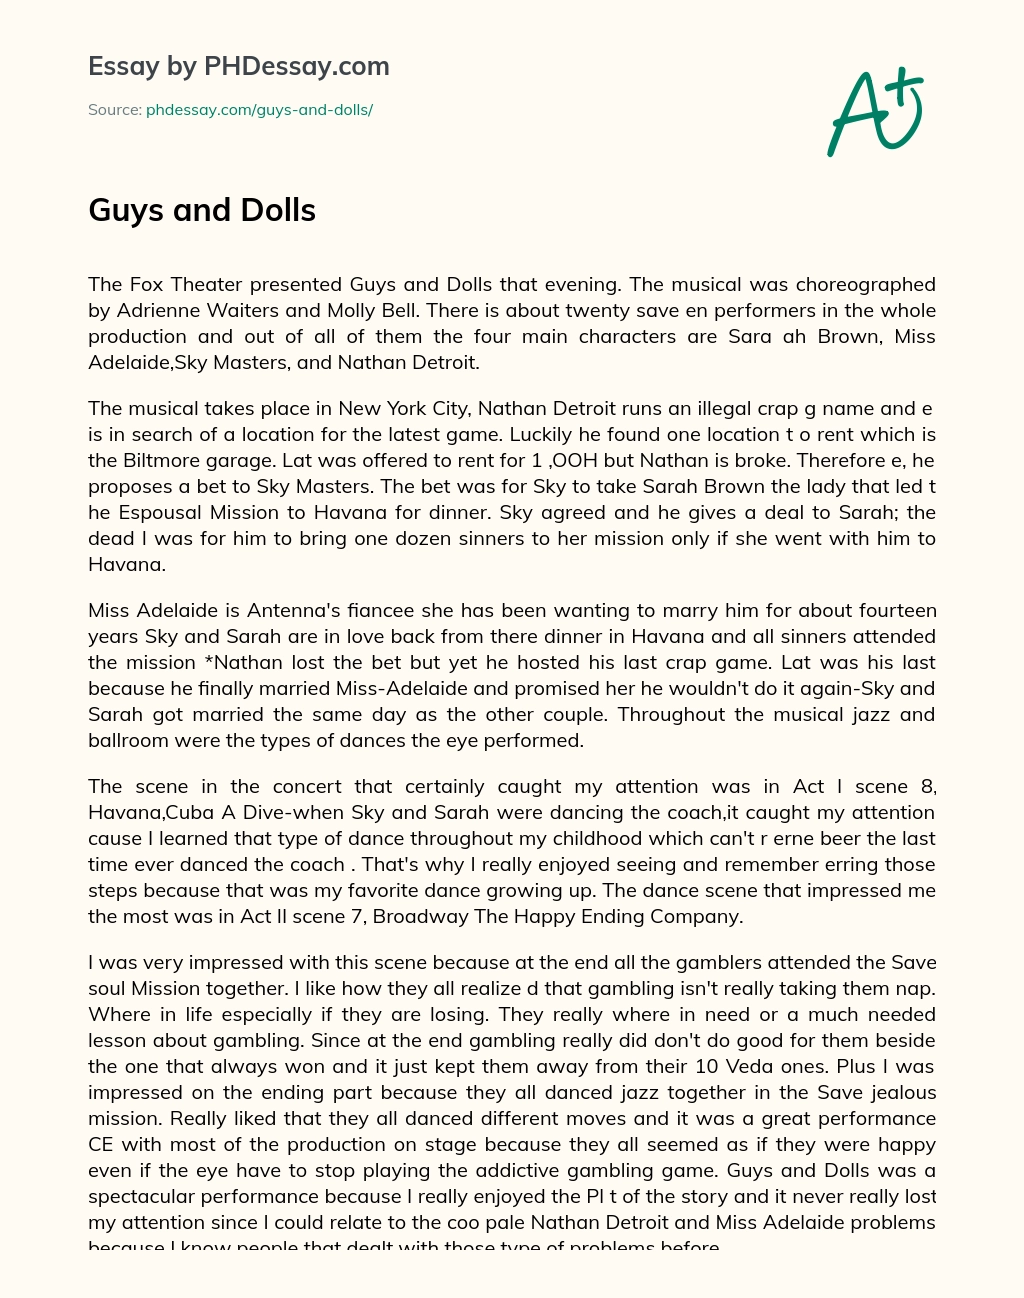 The Fox Theater Presents Guys and Dolls: A Musical Set in New York City with Four Main Characters essay